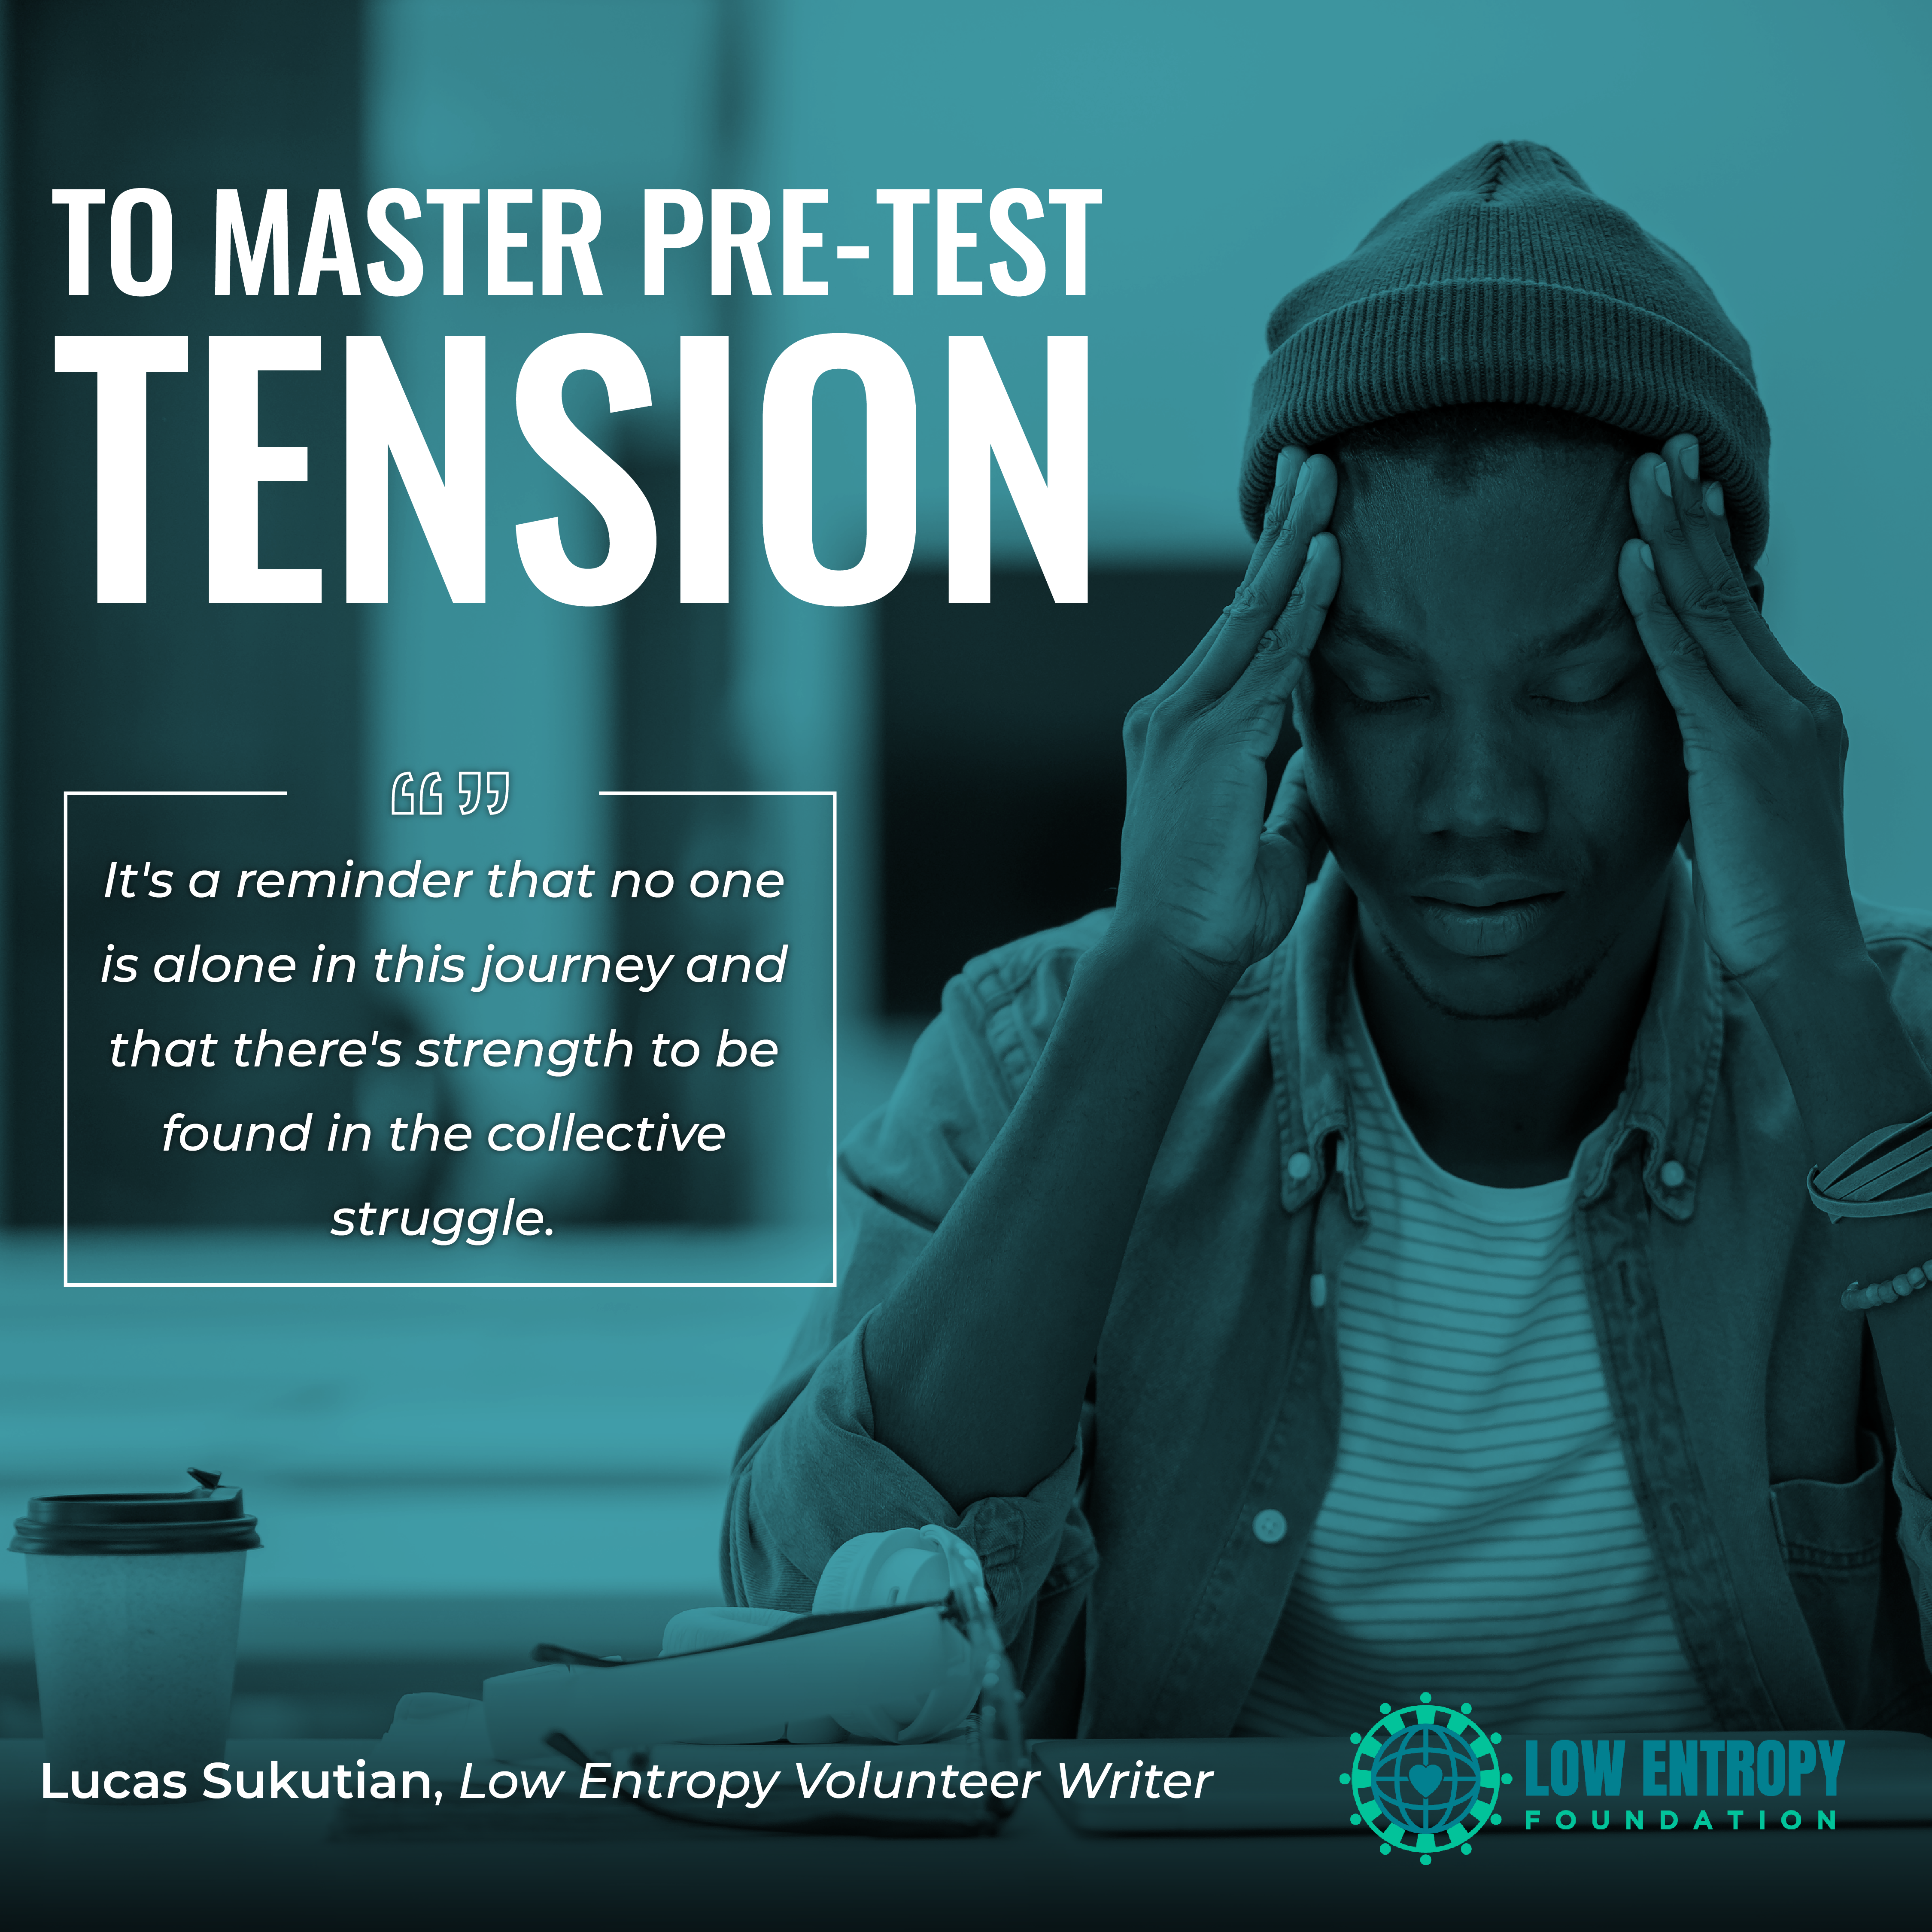 How To Master Pre-Test Tension